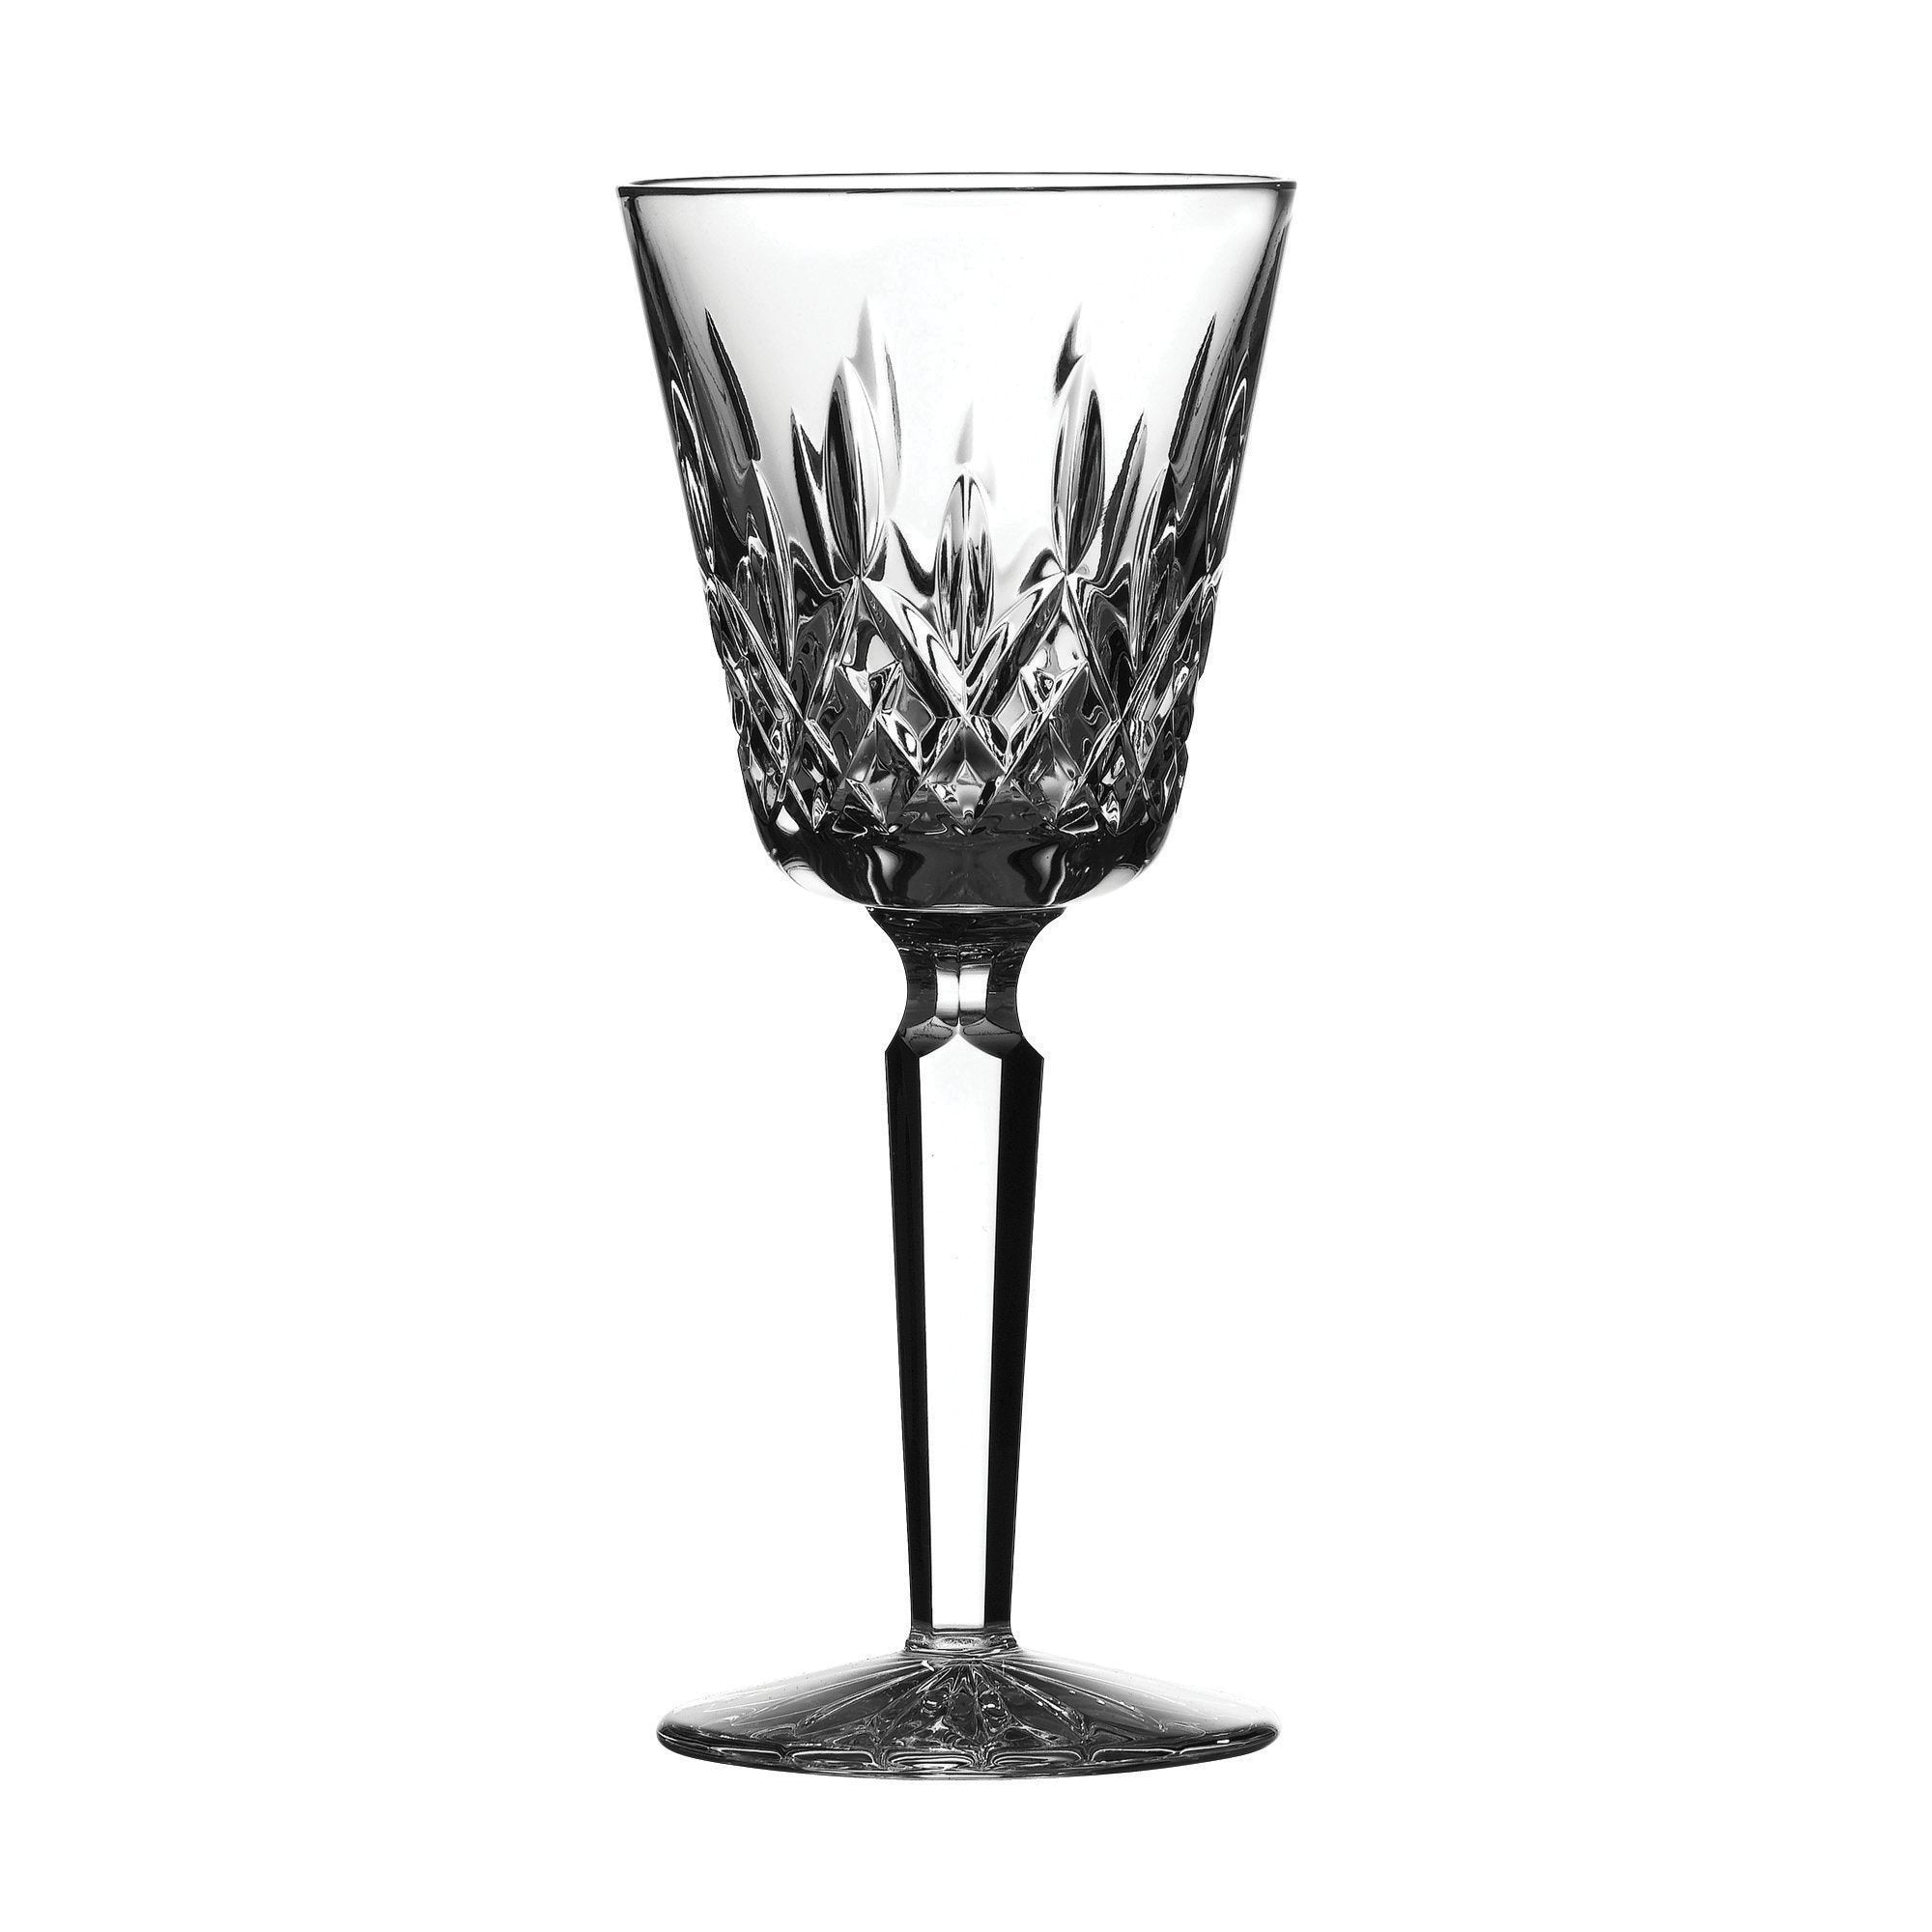 Waterford Lismore Tall Claret Wine Glass, 5-Ounce  - Like New